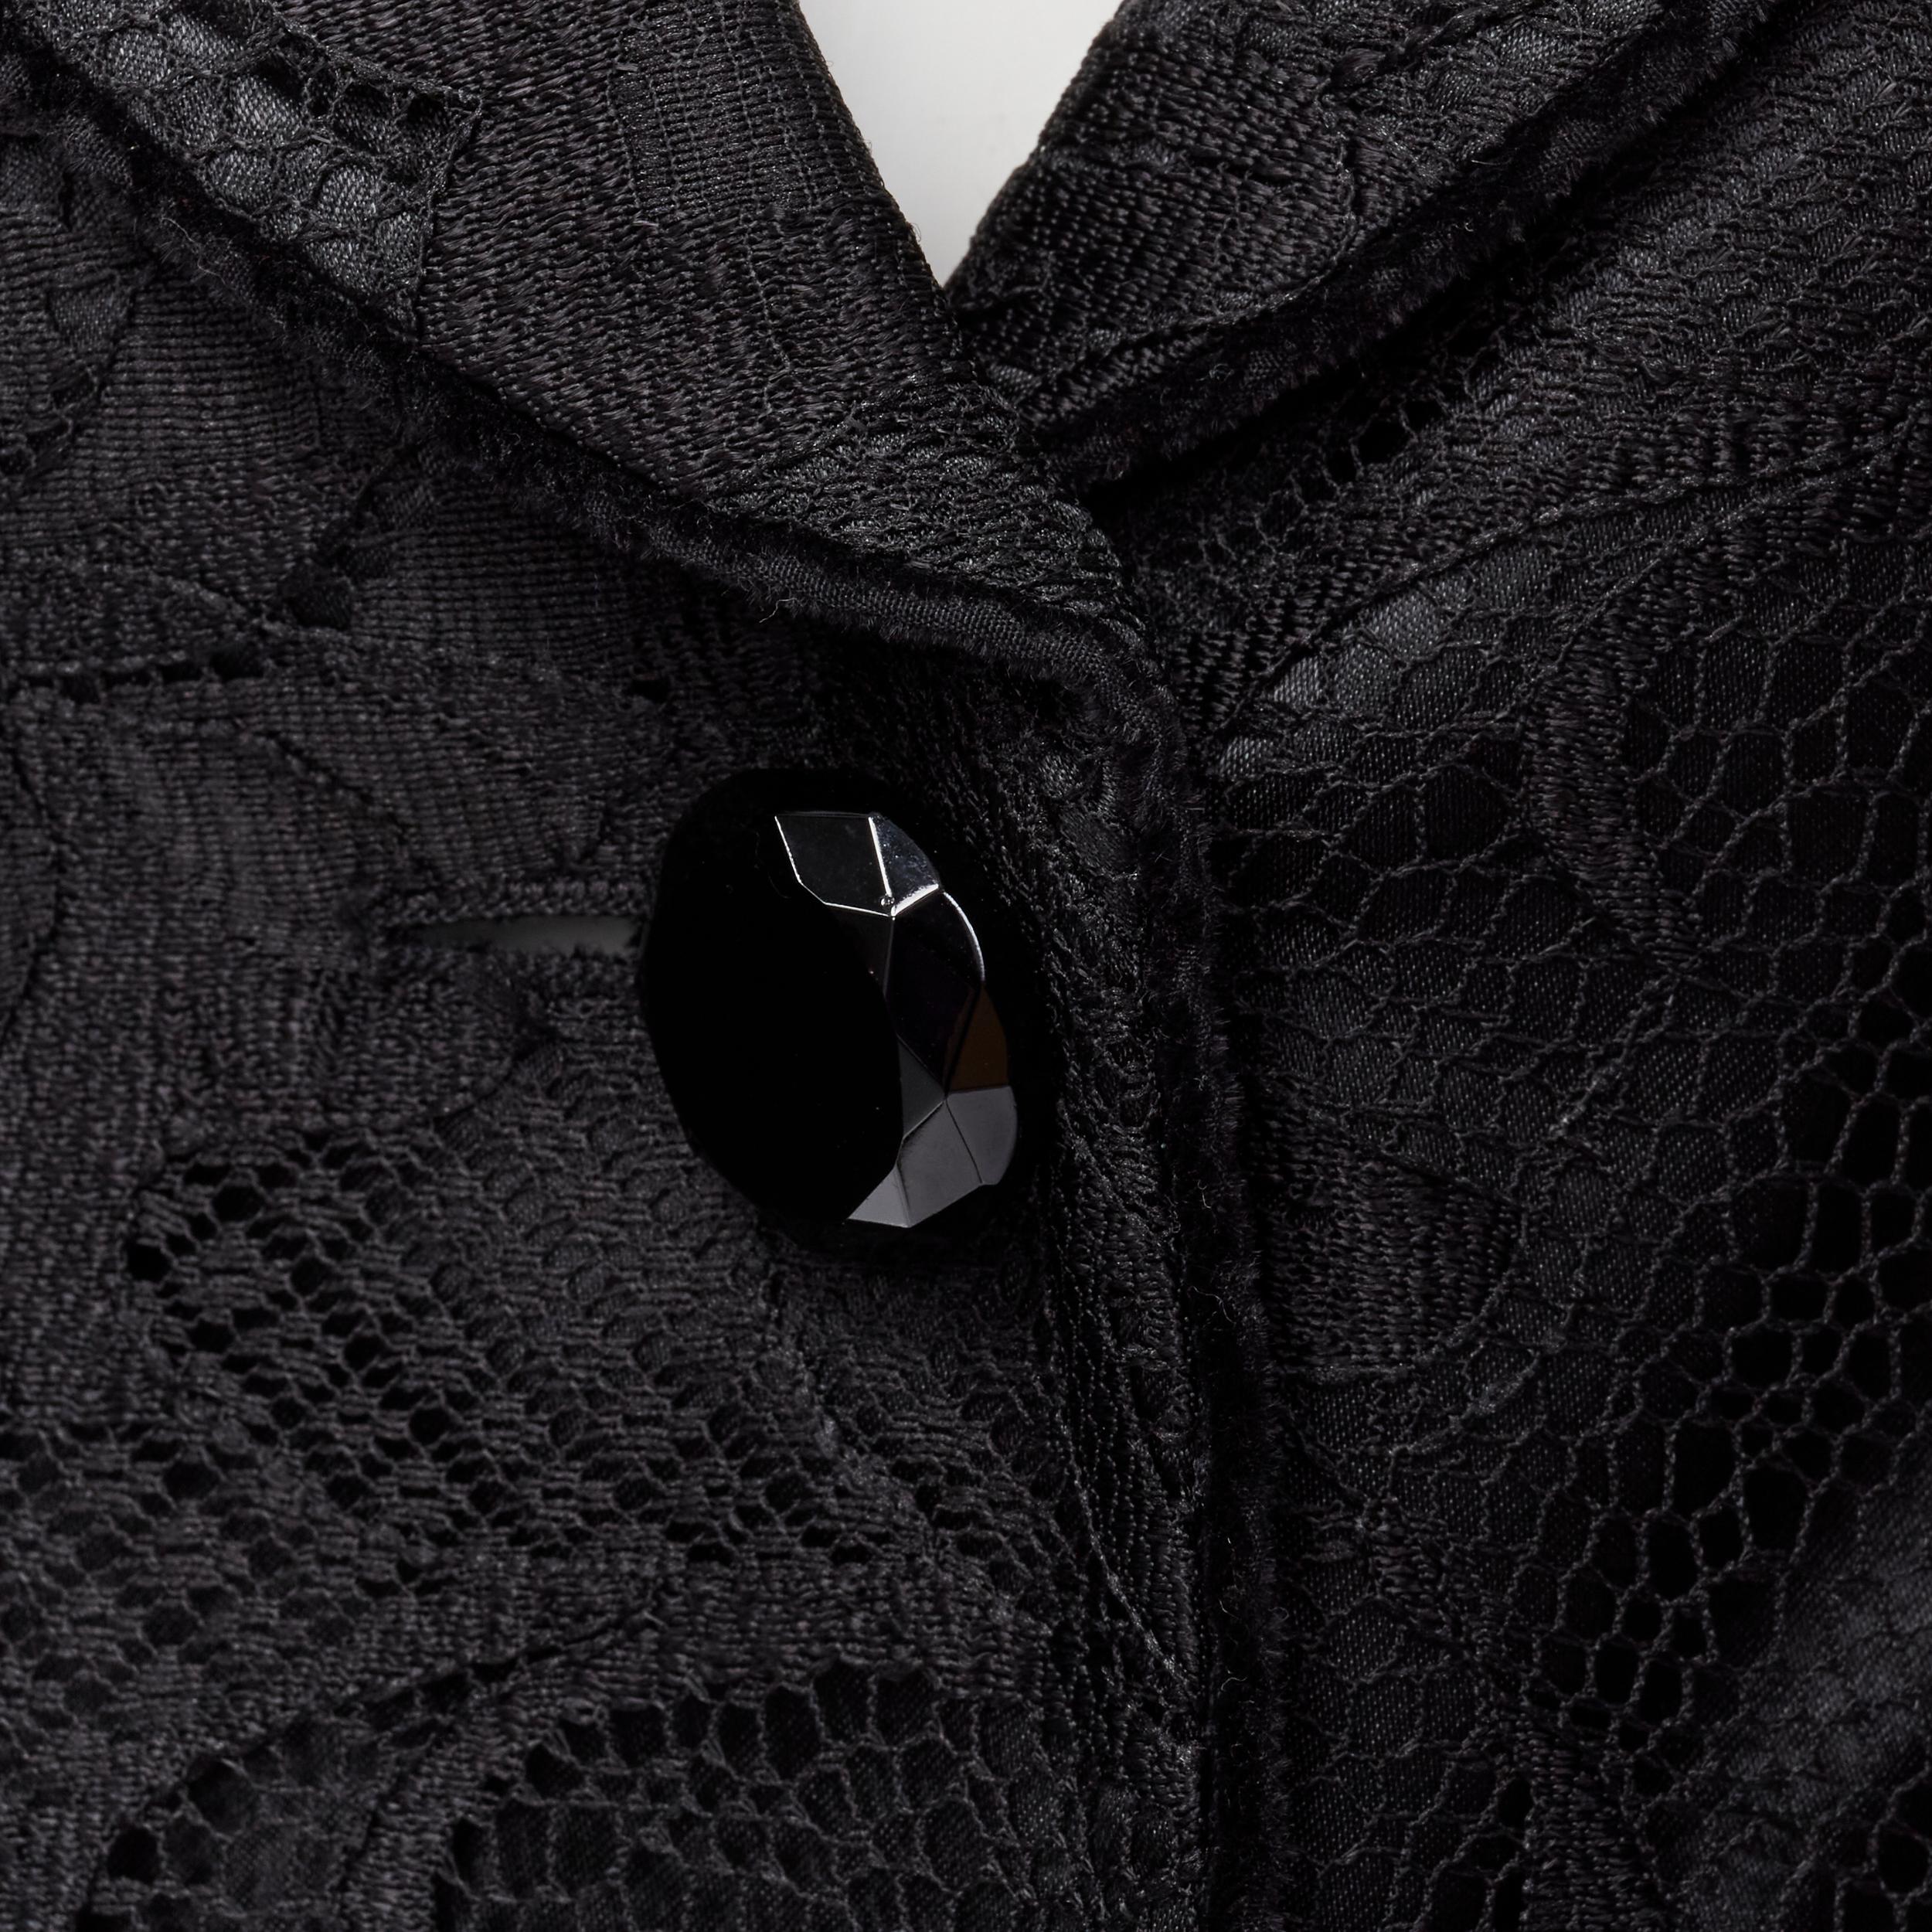 EMPORIO ARMANI black lace jewel cut buttons fitted blazer IT40 S 
Reference: MAWG/A00069 
Brand: Emporio Armani 
Material: Polyester 
Color: Black 
Pattern: Solid 
Closure: Button 
Extra Detail: Floral lace overlay. Black velvet piping. Padded